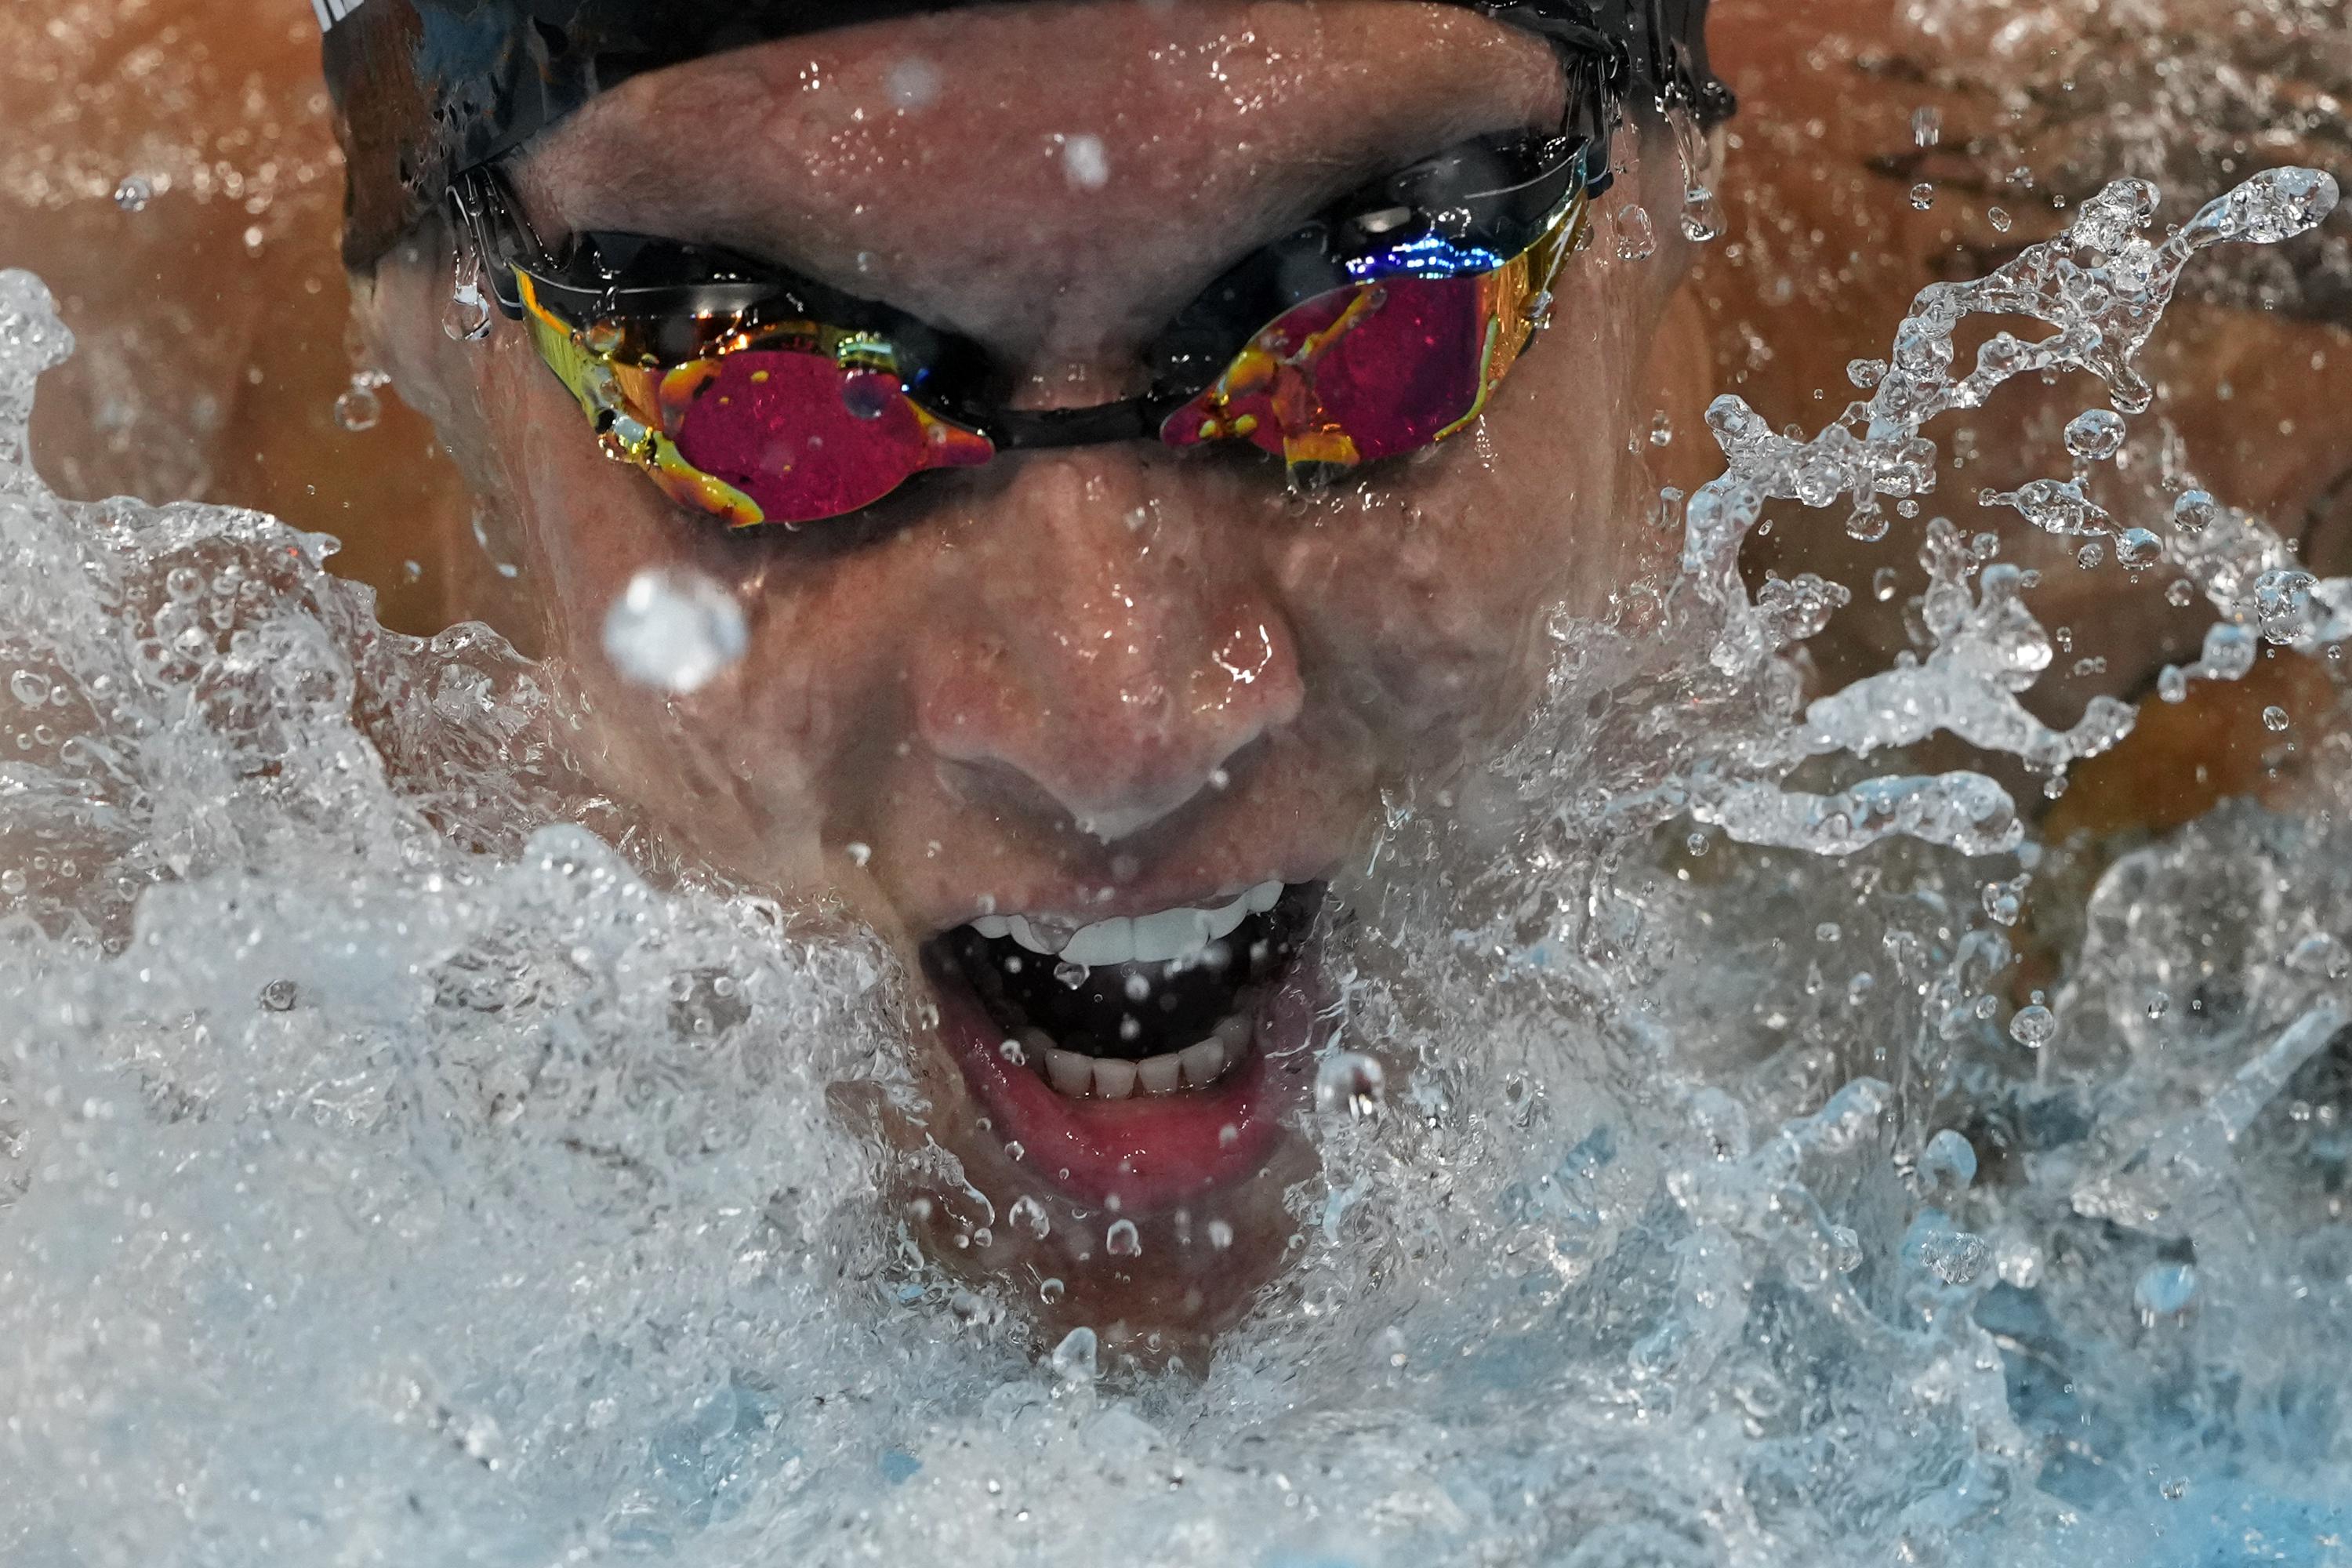 Pool finale: Dressel, McKeon highlight last day of swimming - Associated Press